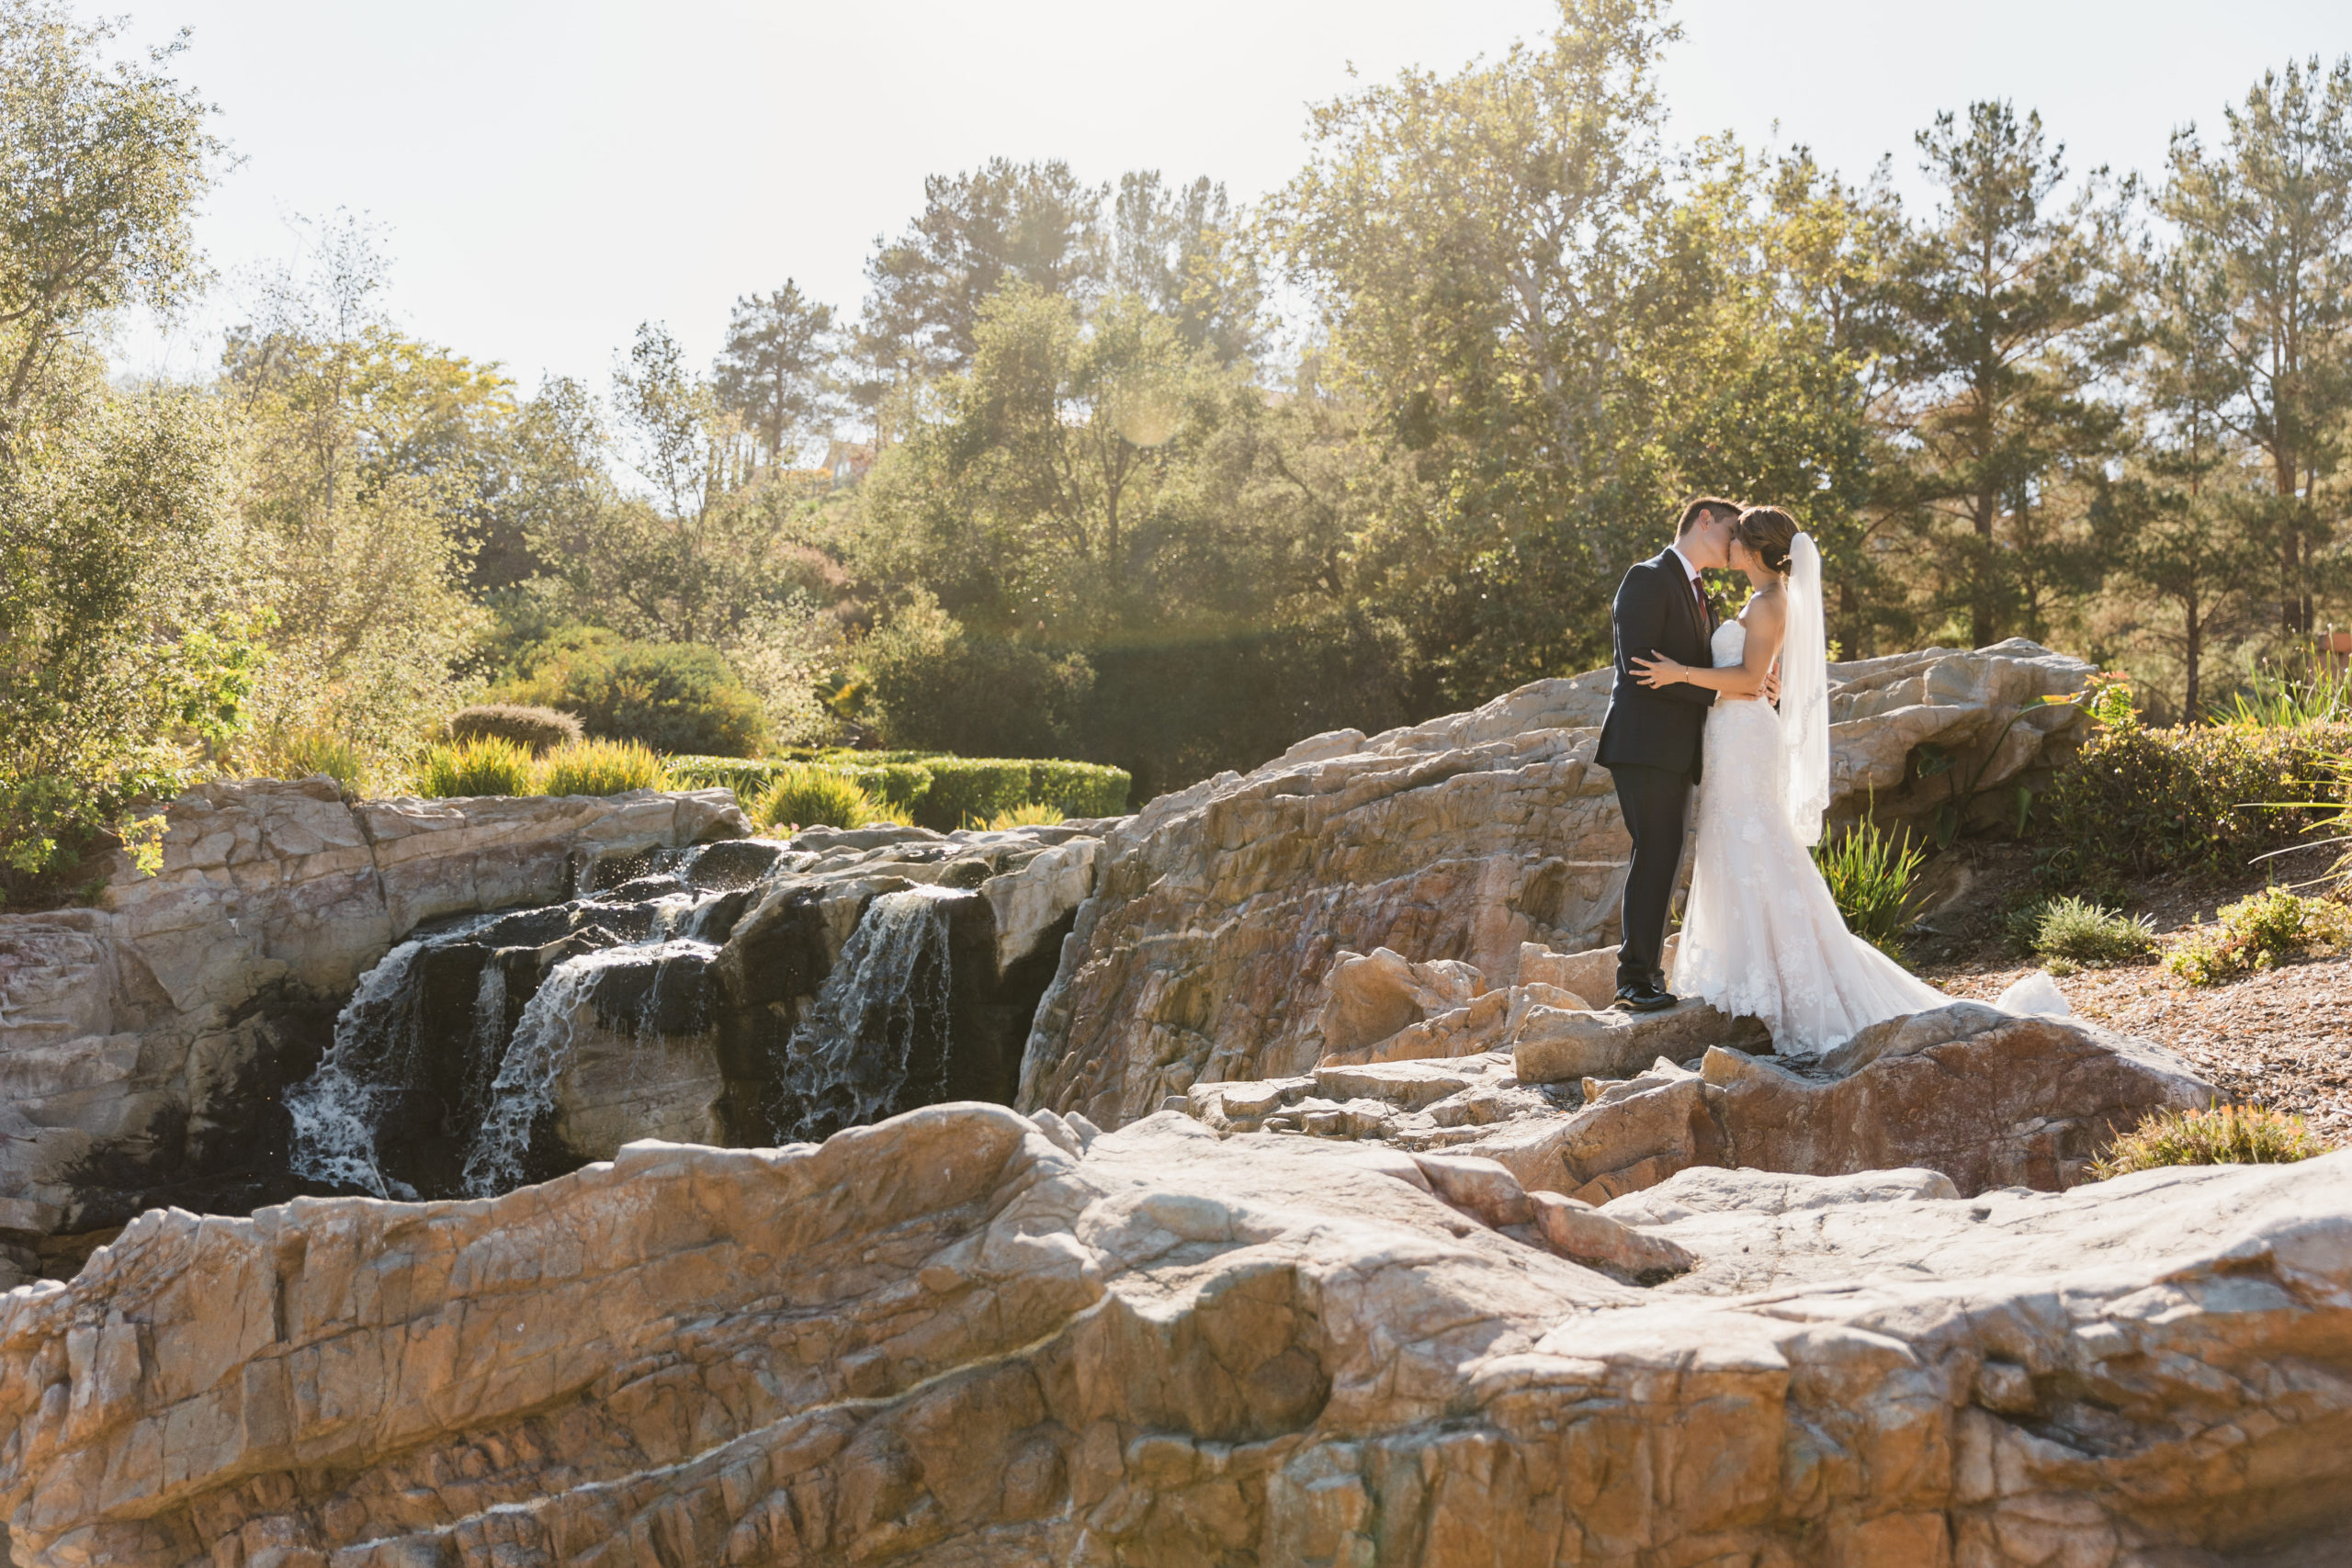 bride in strapless lace wedding dress and groom in navy tuxedo take outdoor portrait photos by waterfall at Dove Canyon Golf Club